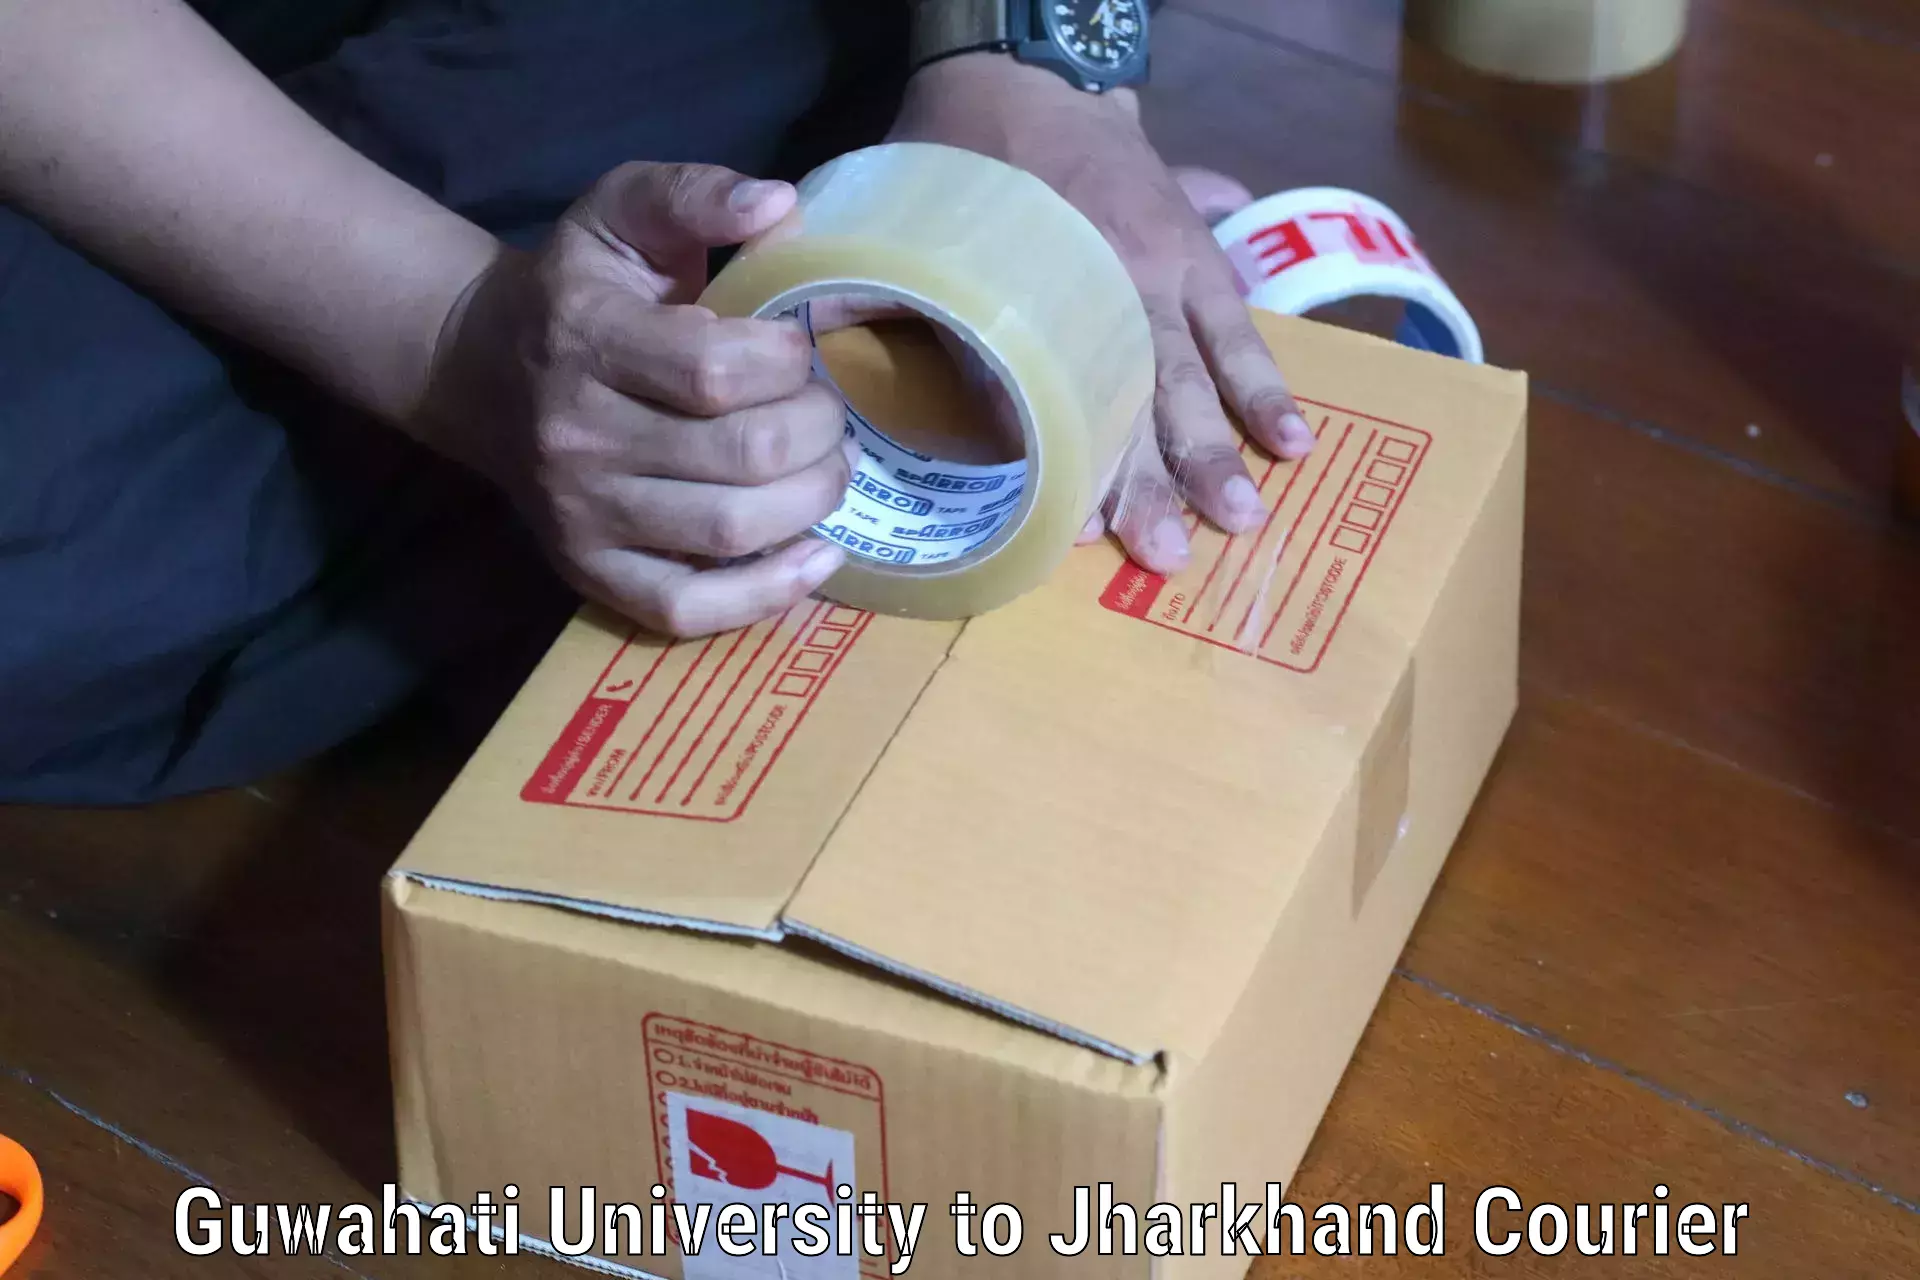 Advanced package delivery Guwahati University to Ranchi